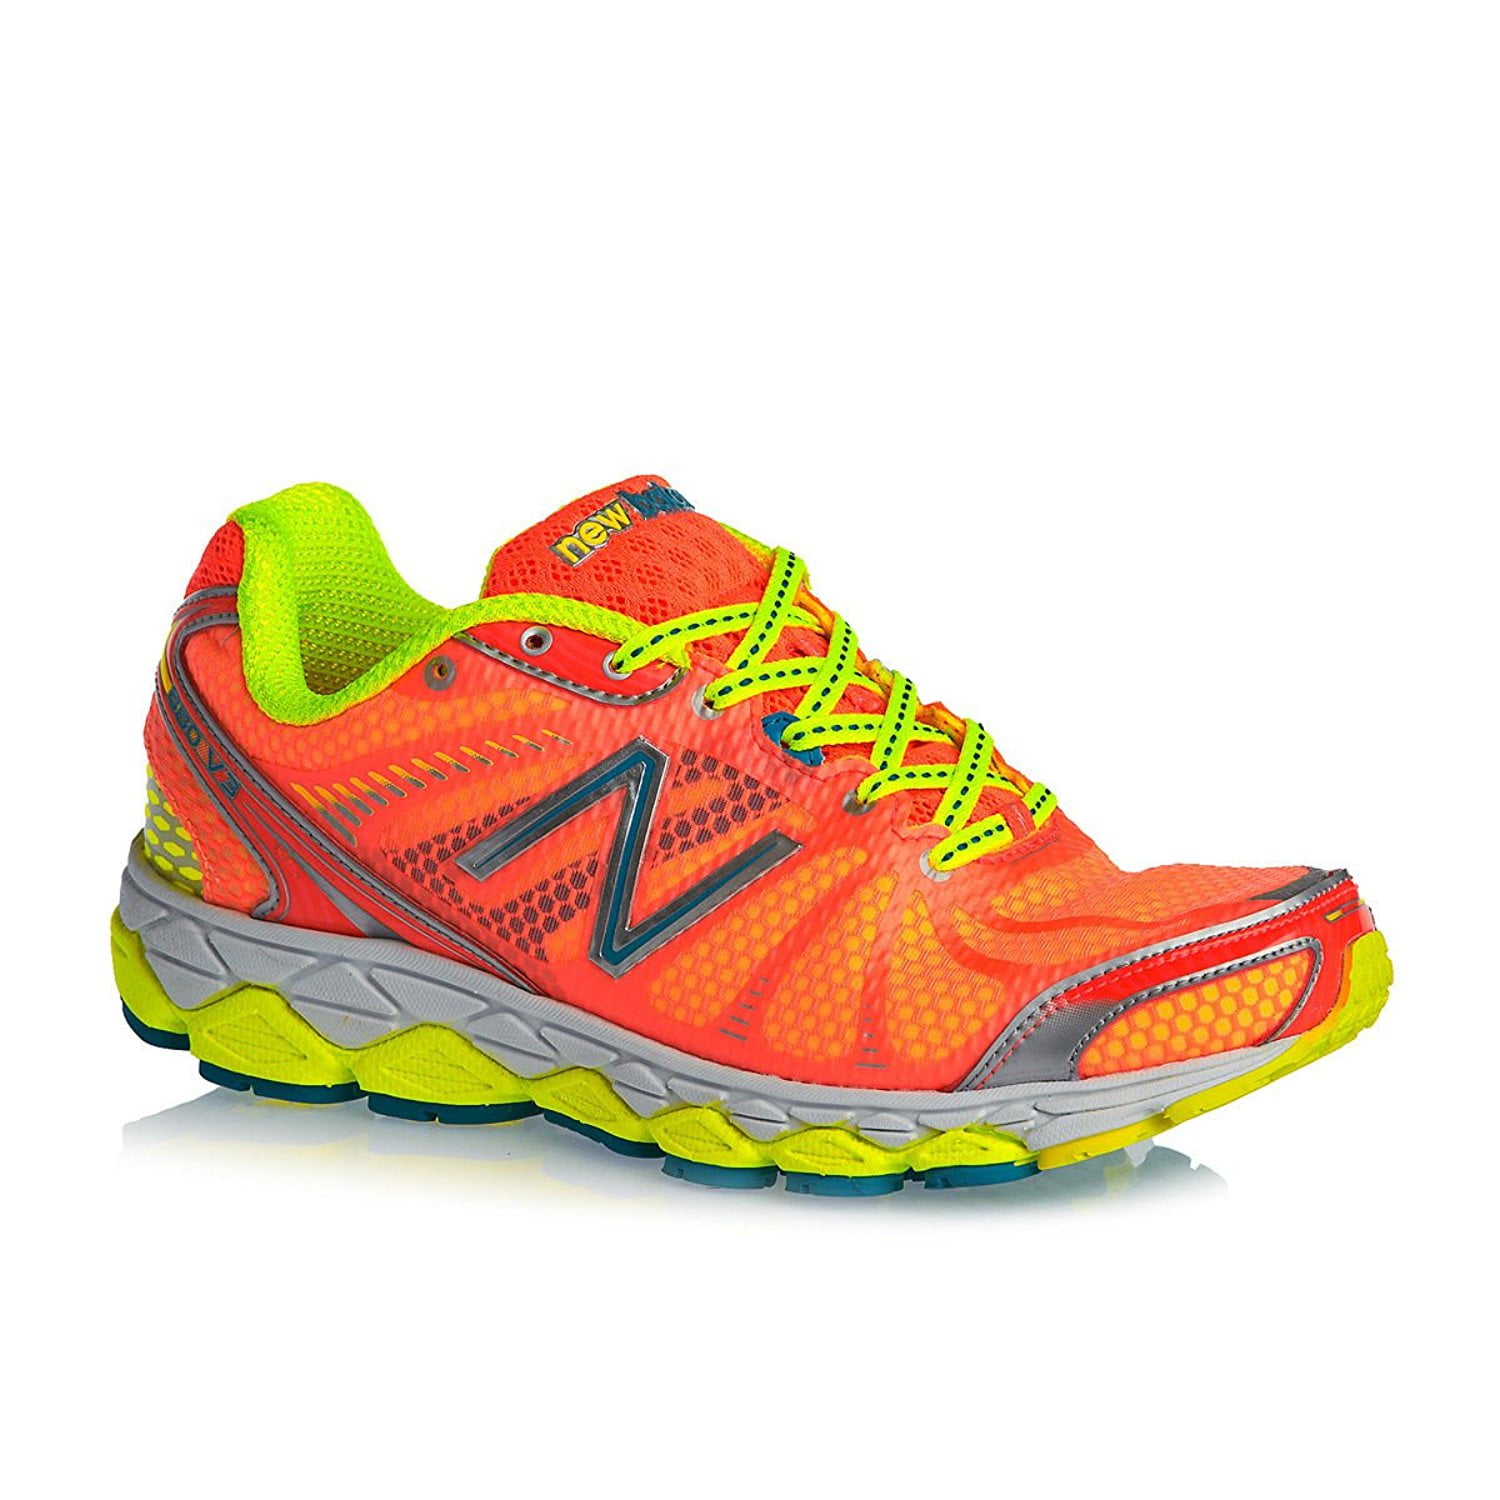 W880CY3 Running Shoe, Coral/Yellow 